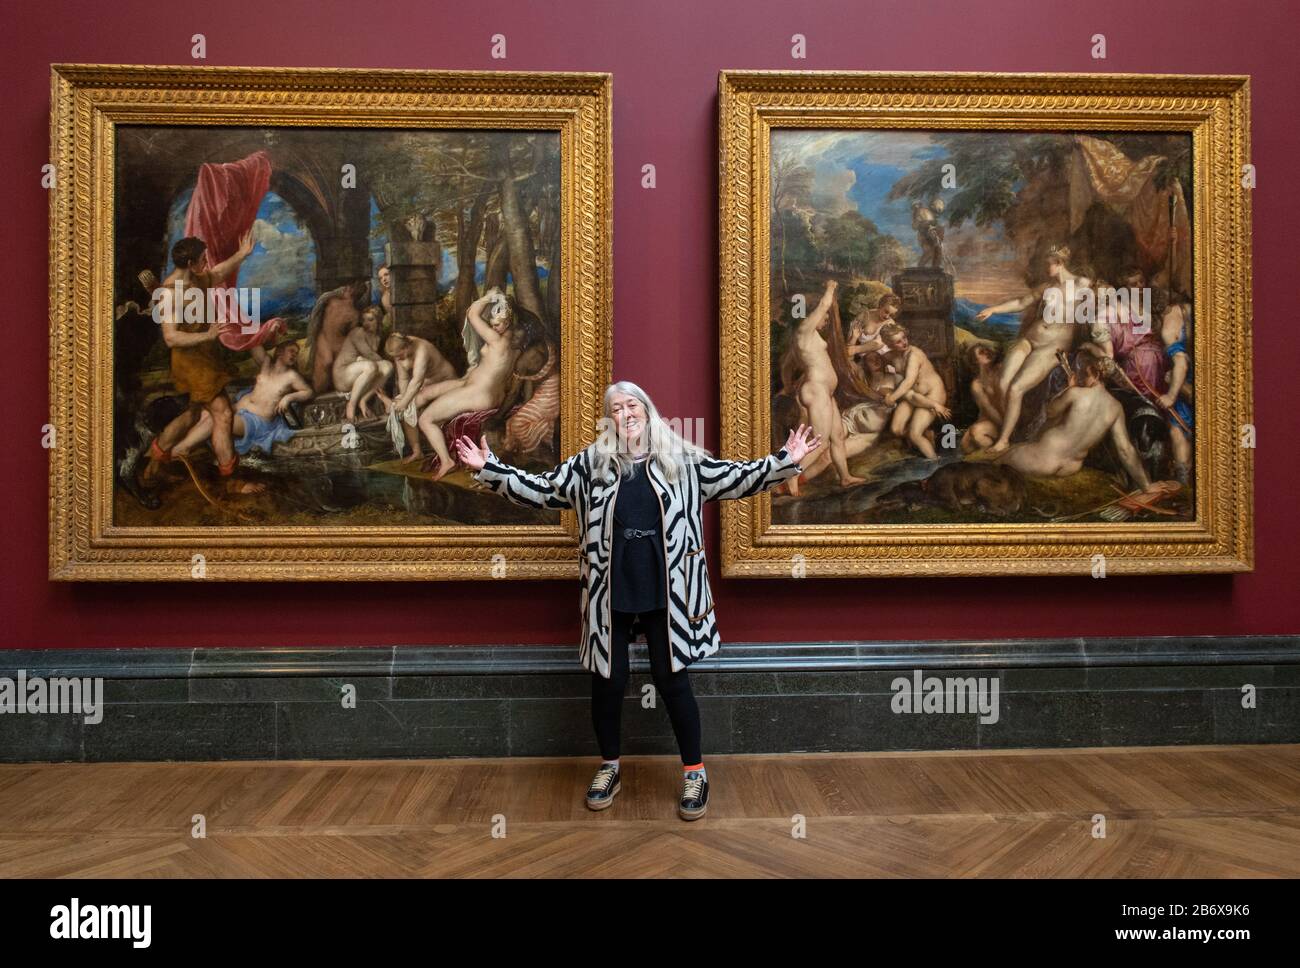 Historian Mary Beard views 'Diana and Actaeon' (left) and, 'Diana and Callisto', part of Titian's Poesie series of large scale Greek mythological paintings that feature in the 'Titian: Love, Desire, Death' exhibition, at the National Gallery, London. The exhibition brings the series of six paintings together in their entirety for the first time since the late 16th century. Stock Photo